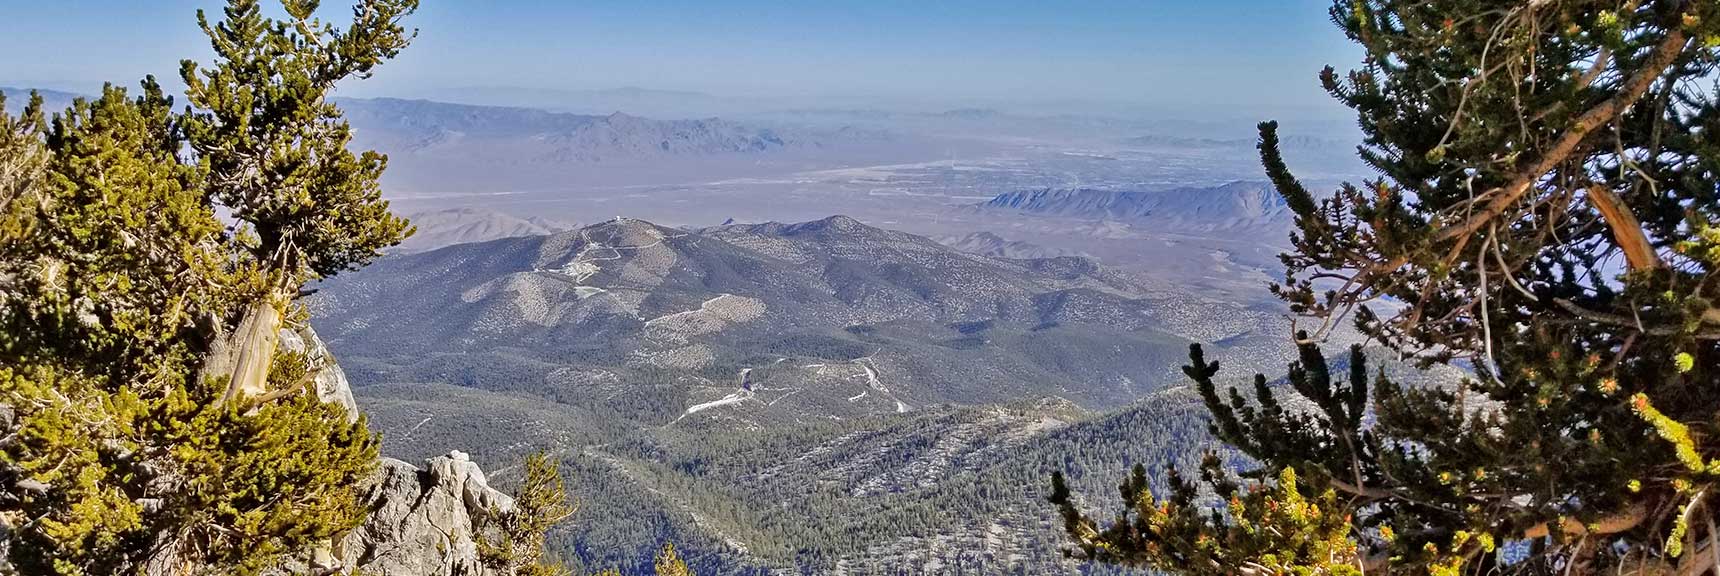 Looking Back Down the Final Approach to Mummy Mountain Summit, Nevada